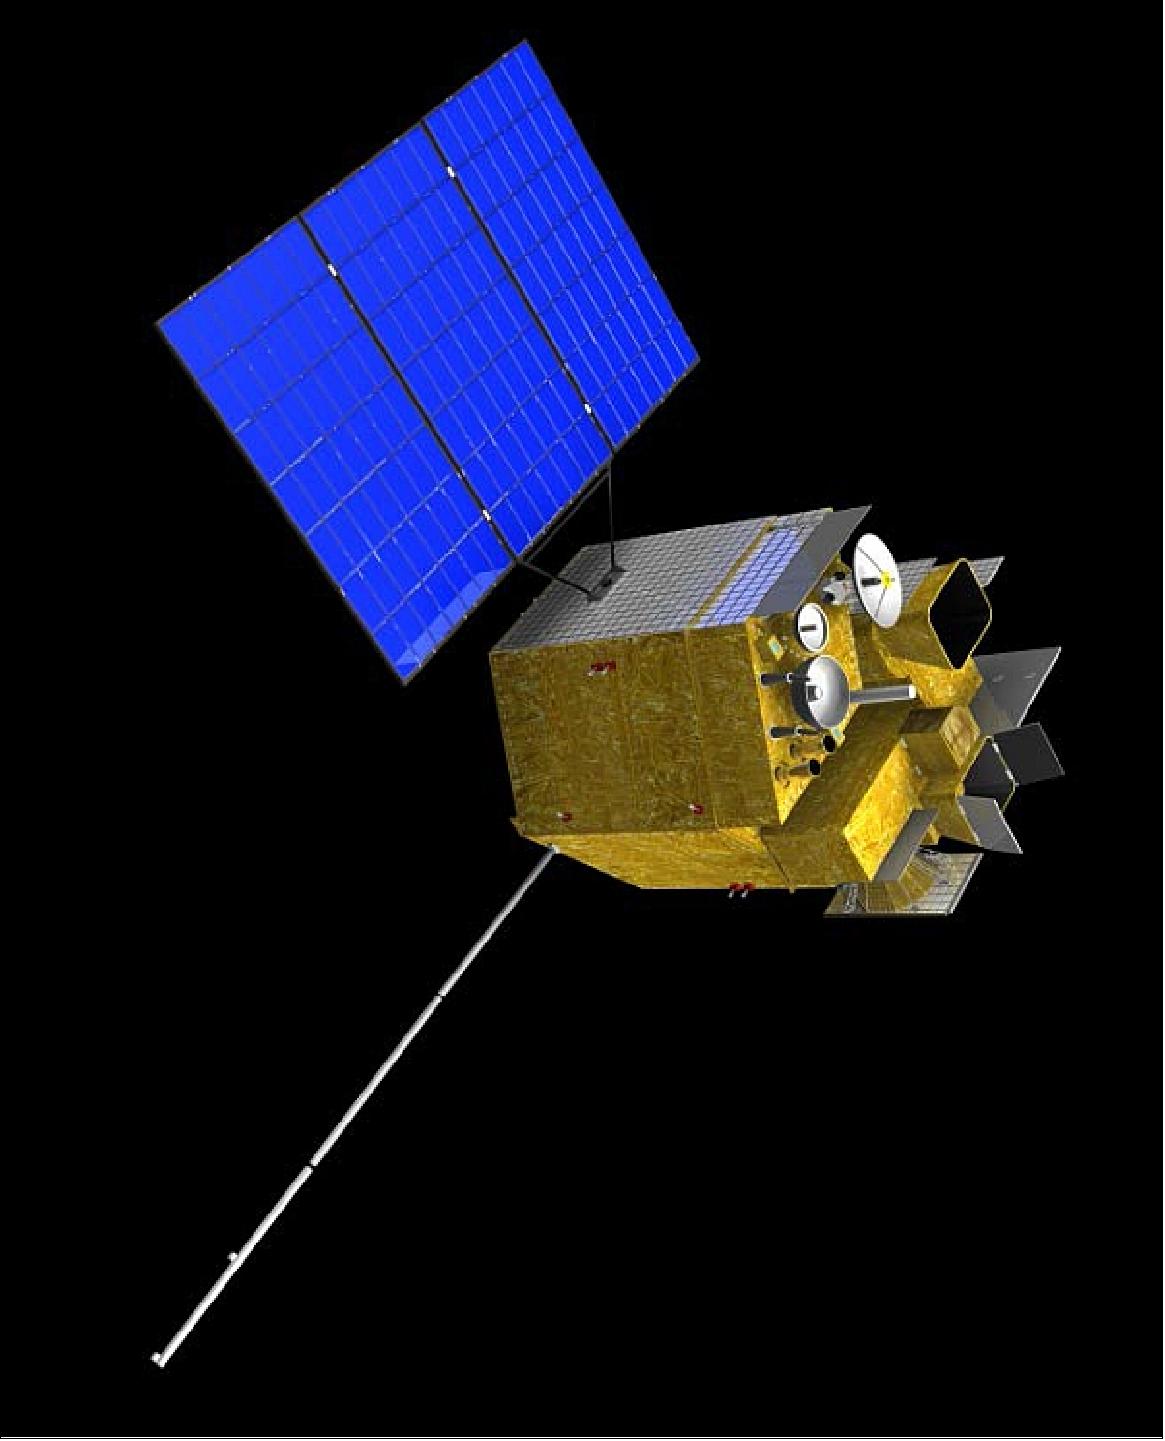 Figure 2: Illustration of the FY-4A prototype spacecraft (image credit: CMA/NSMC, Ref. 12)